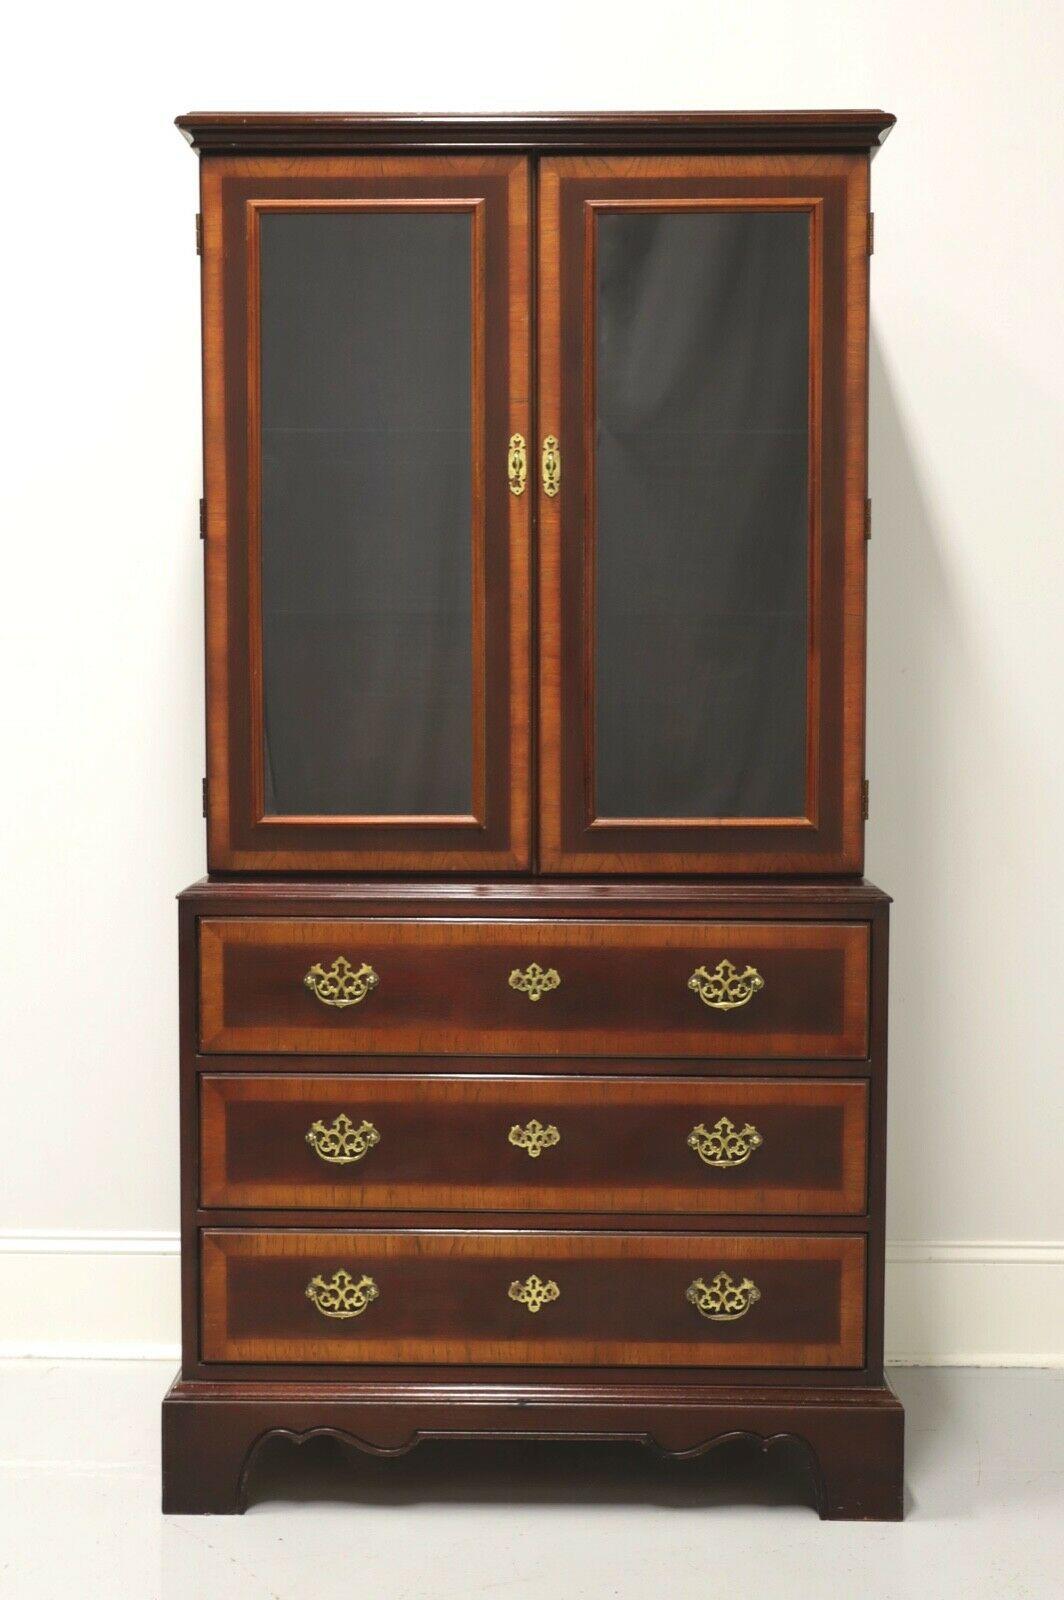 DREXEL 18th Century Collection Banded Mahogany Curio / Display Cabinet - A 7